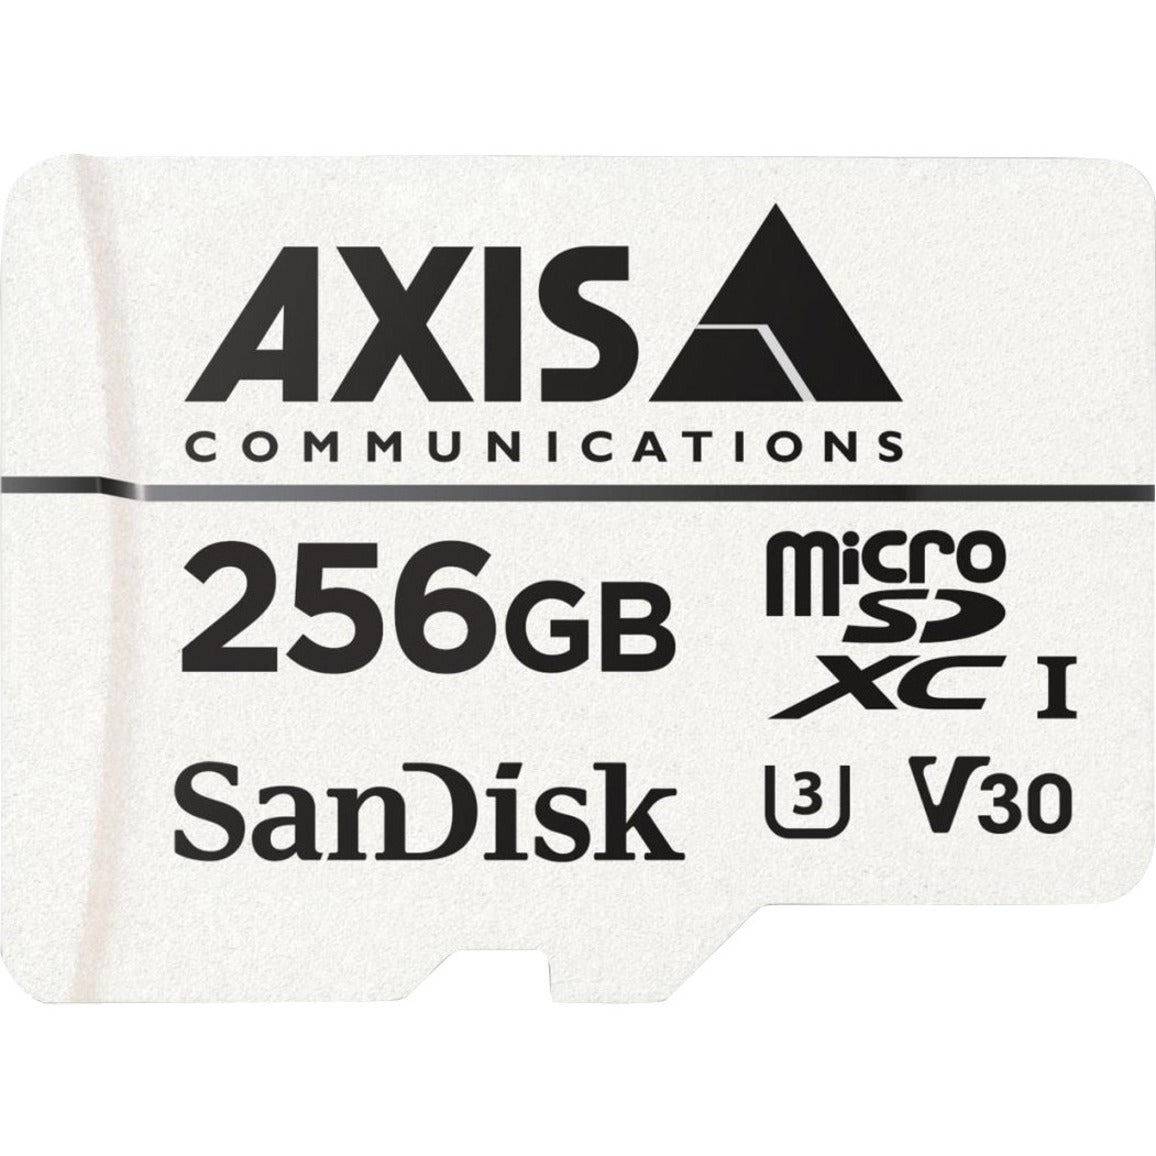 AXIS 02021-001 256GB microSDXC Card, High Capacity Storage for Your Devices